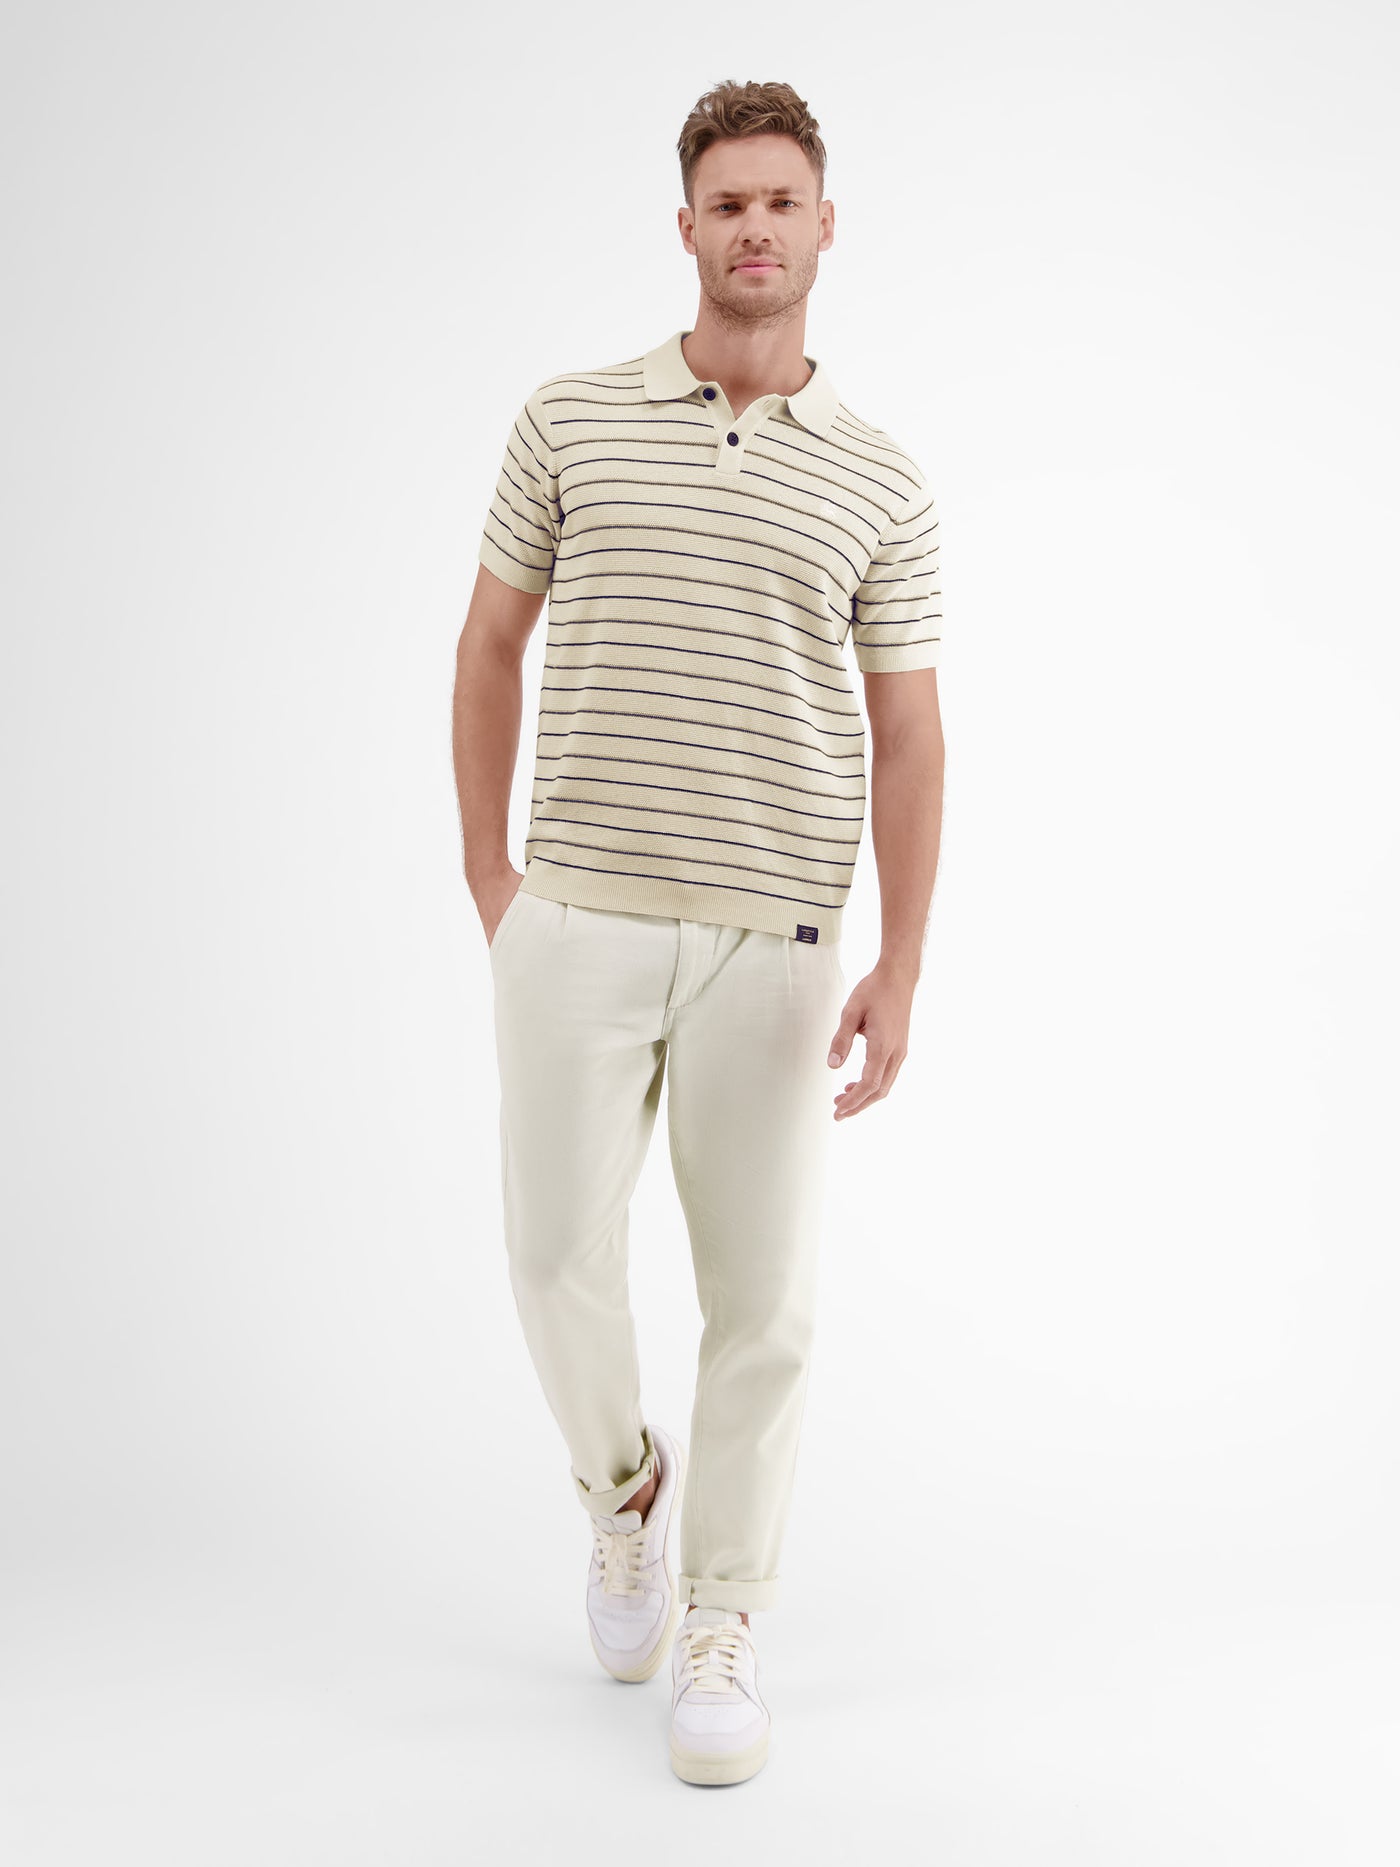 Polo shirt in a summery, stylish knit look